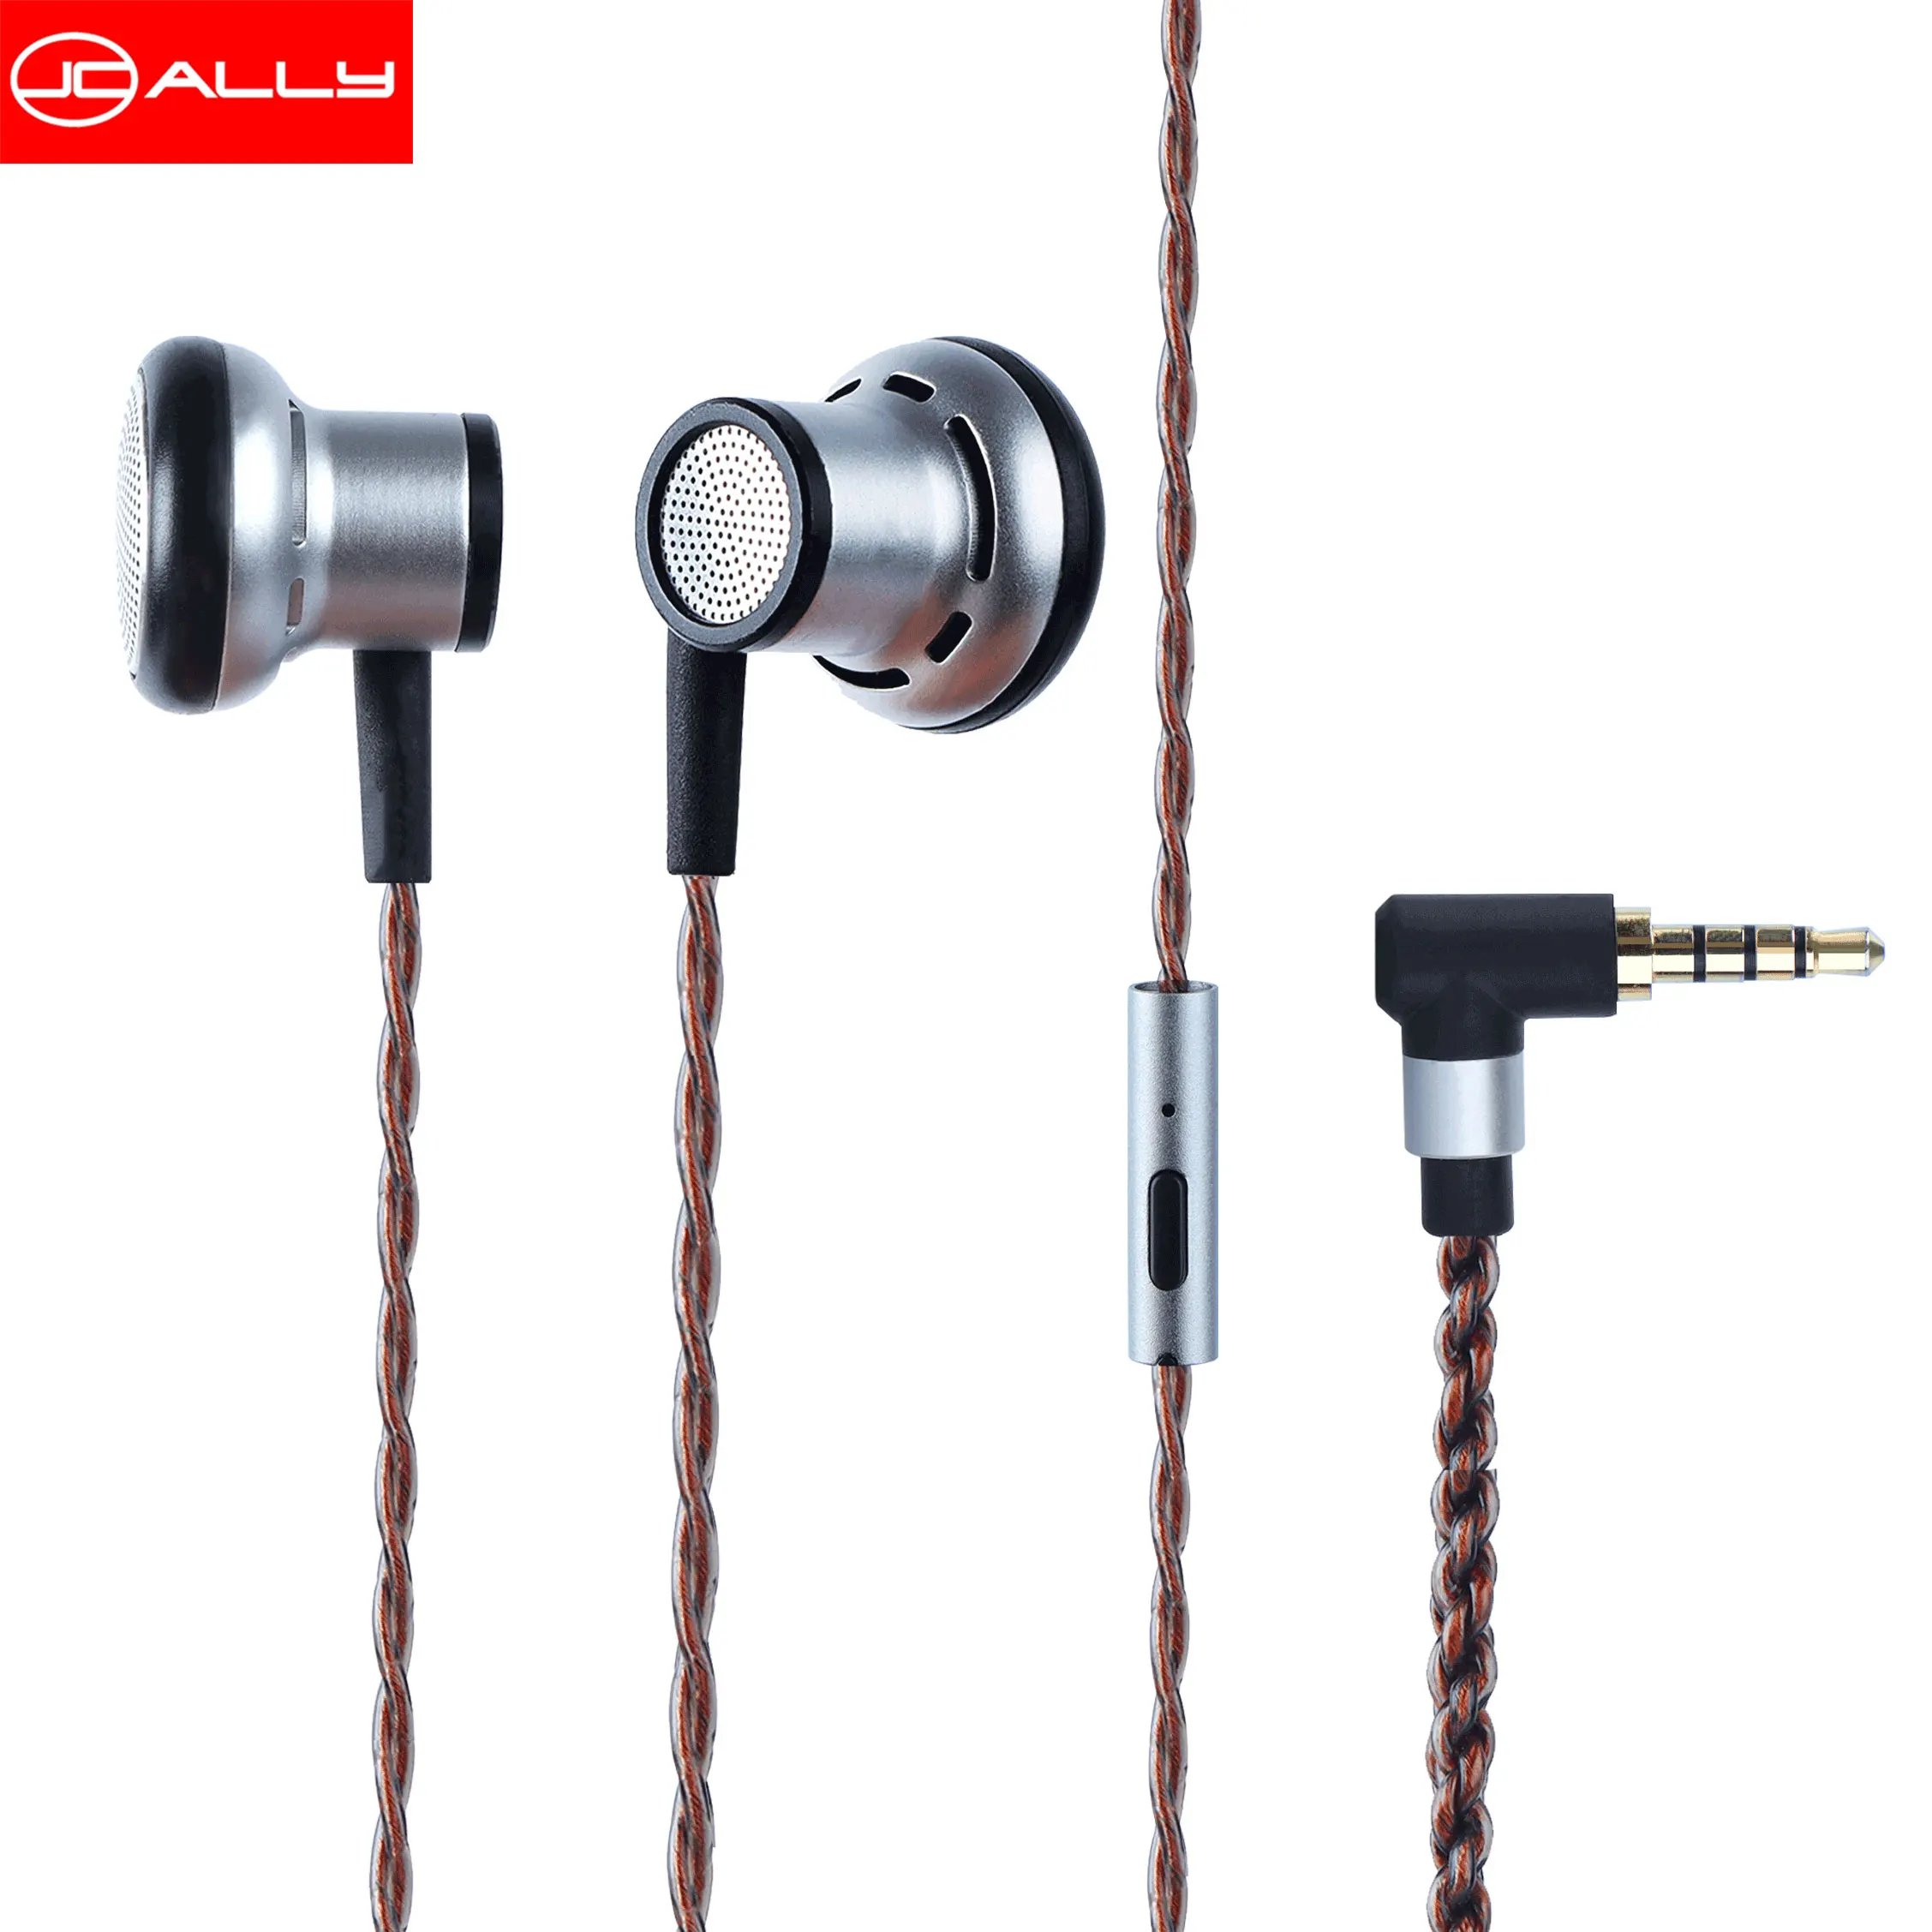 

JCALLY JC10 15.4mm Classic Biological Diaphragm Female Poison Earphone 32 ohm Flat head earbuds with Microphone Classic